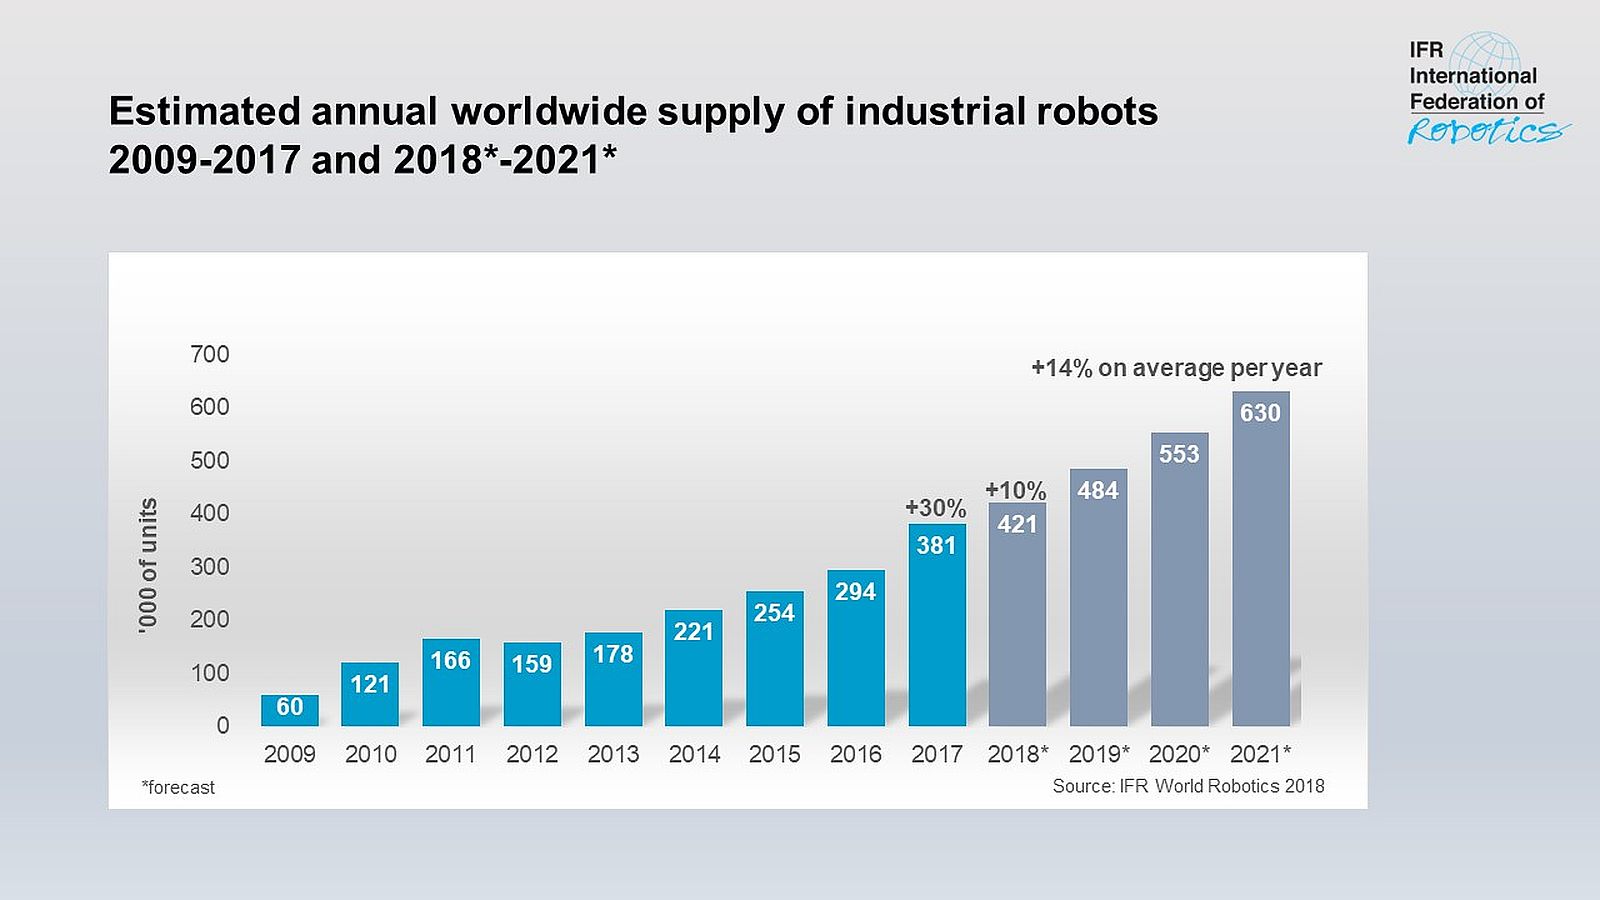 IFR releases World Robotics Report for 2018